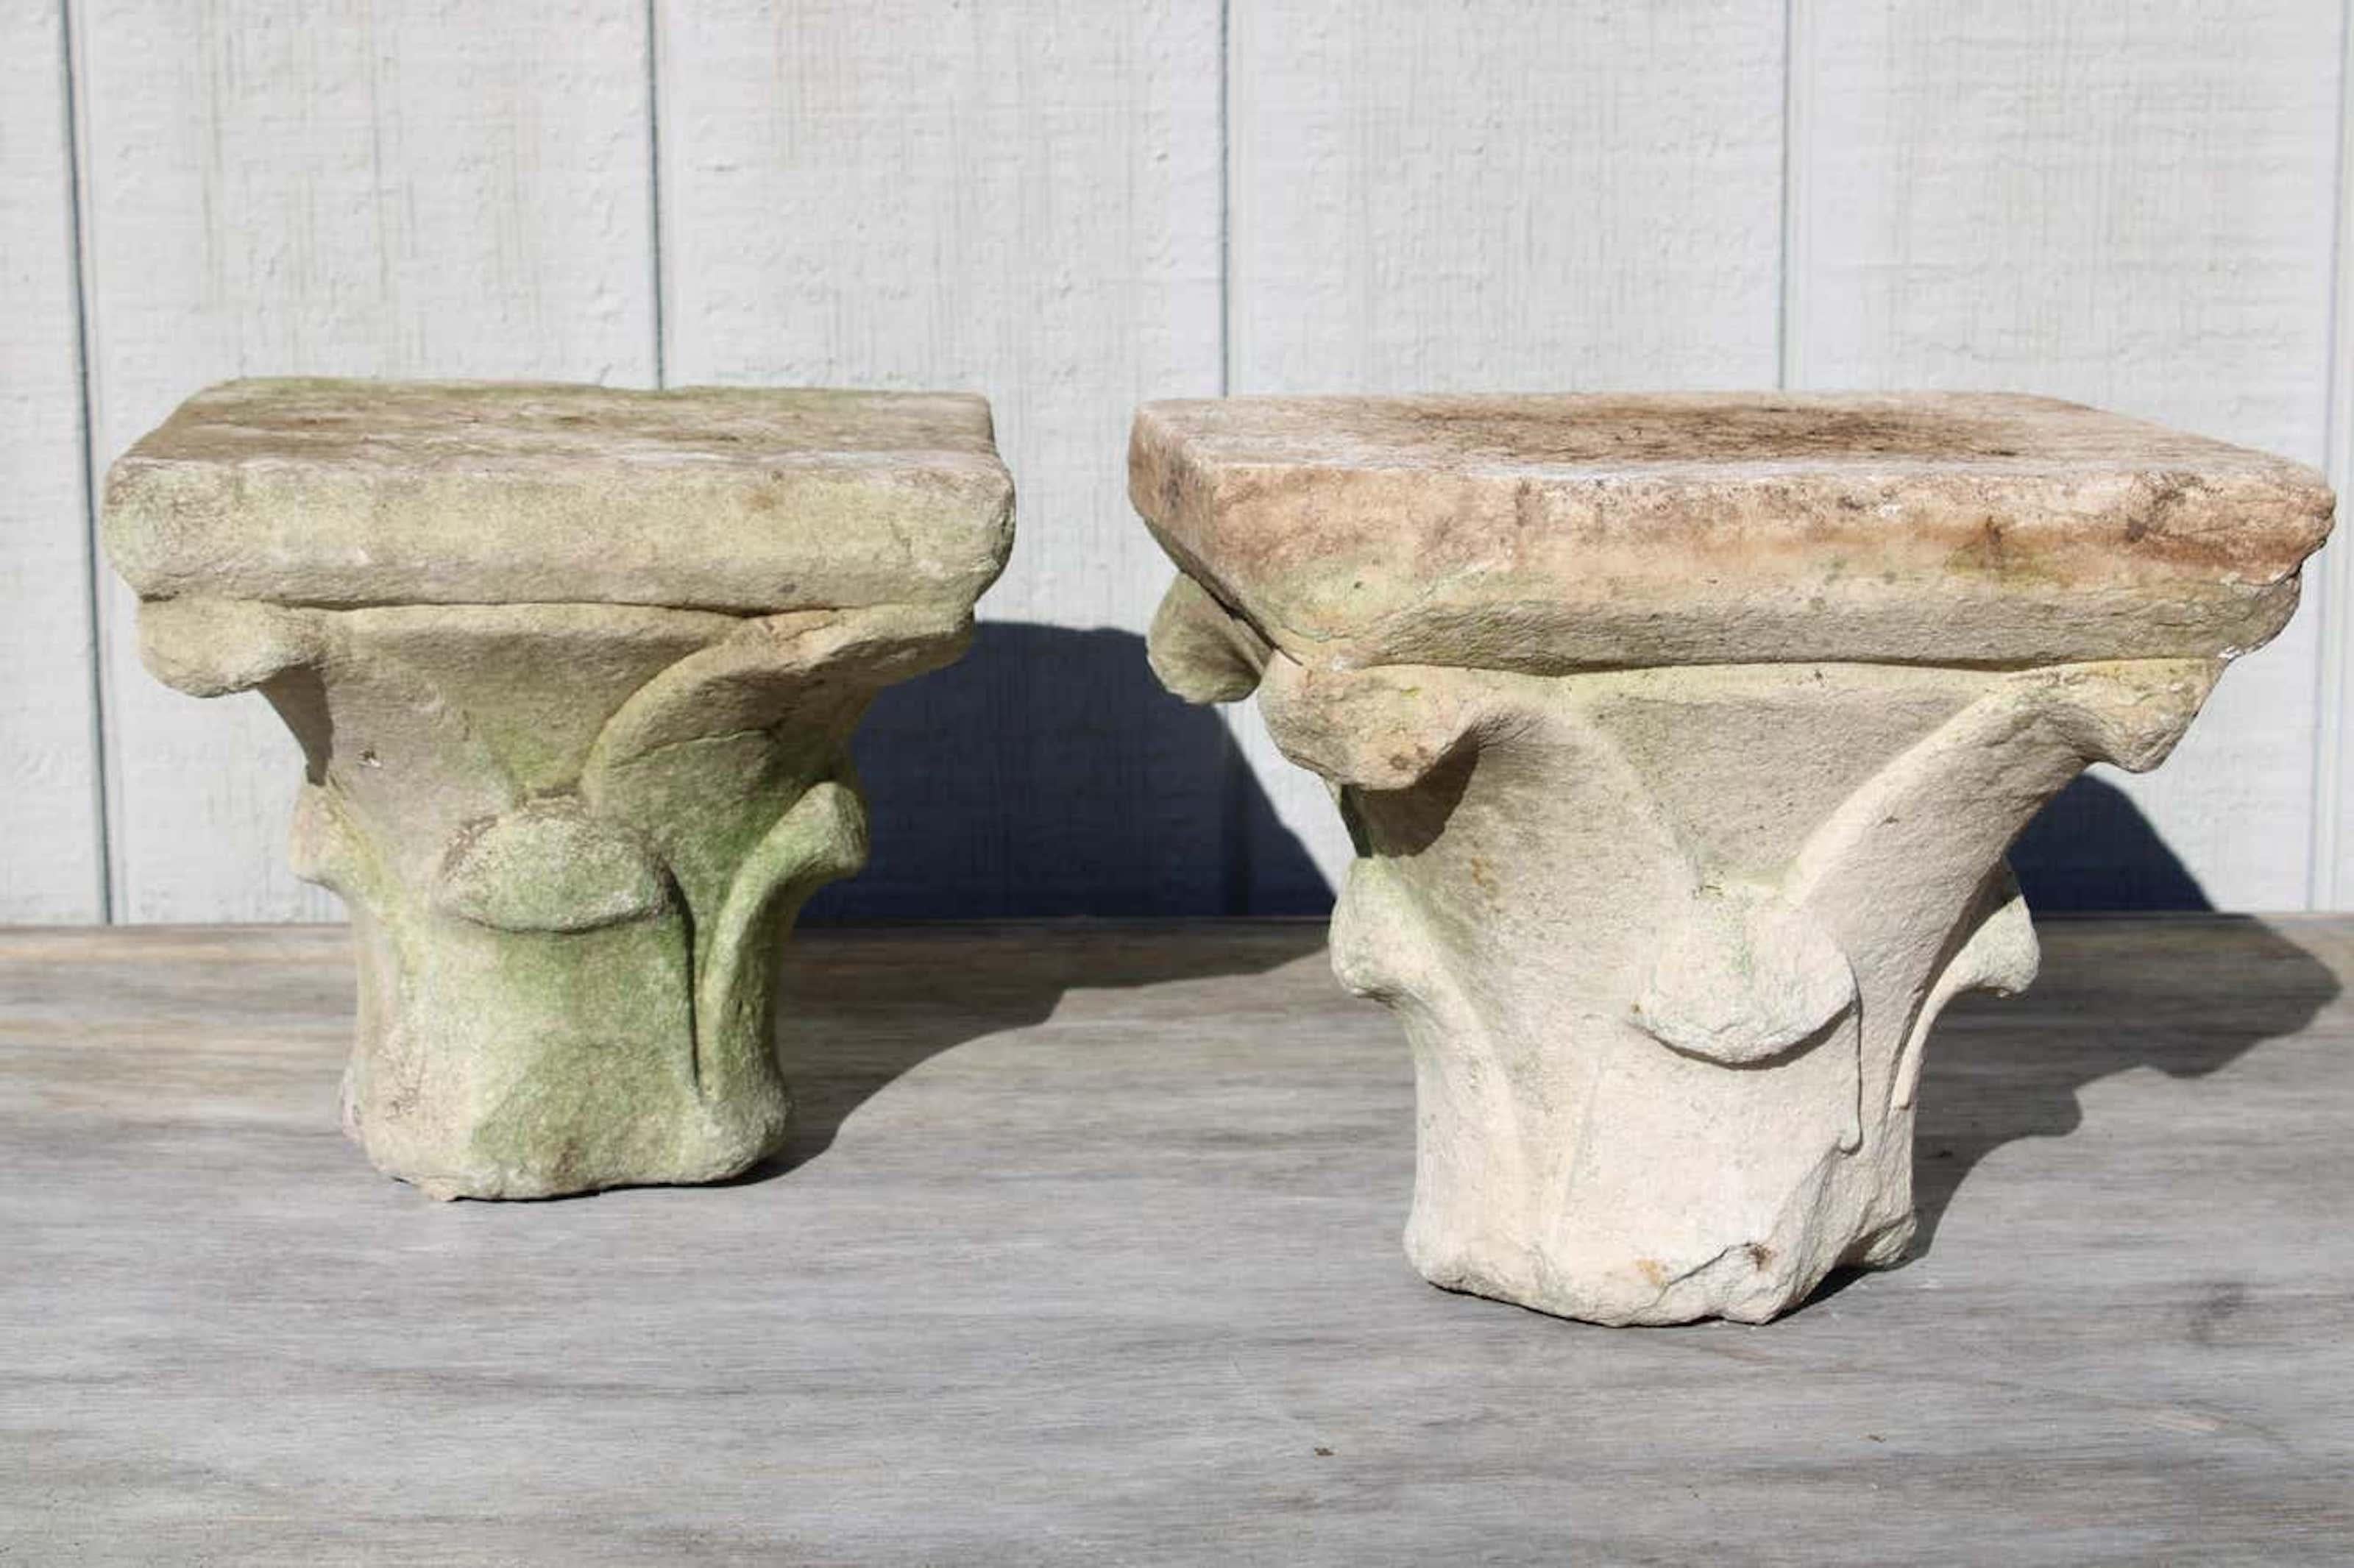 Pair of carved limestone capitals, medieval in character, featuring beautifully worn Roman-style acanthus. These would be beautiful on a bookshelf, or tabletop.